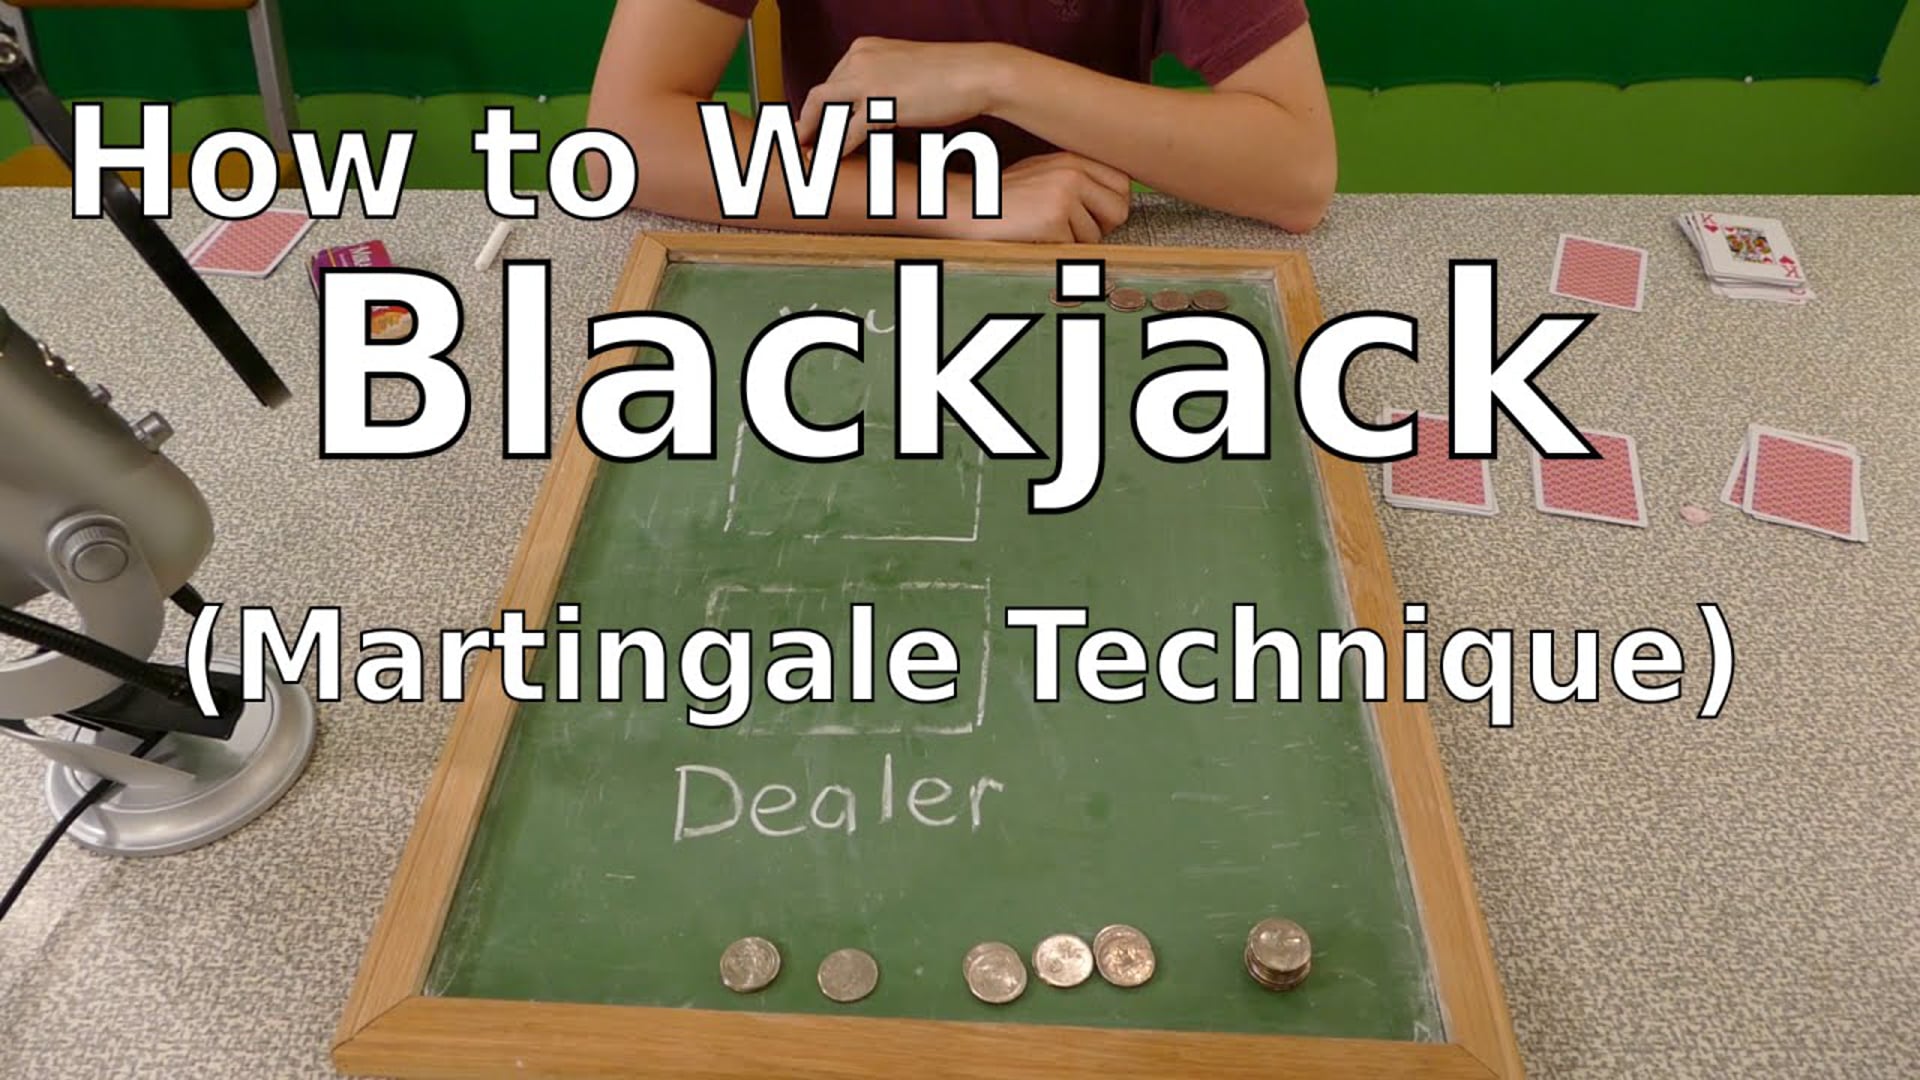 How to Win Blackjack (Martingale Technique)